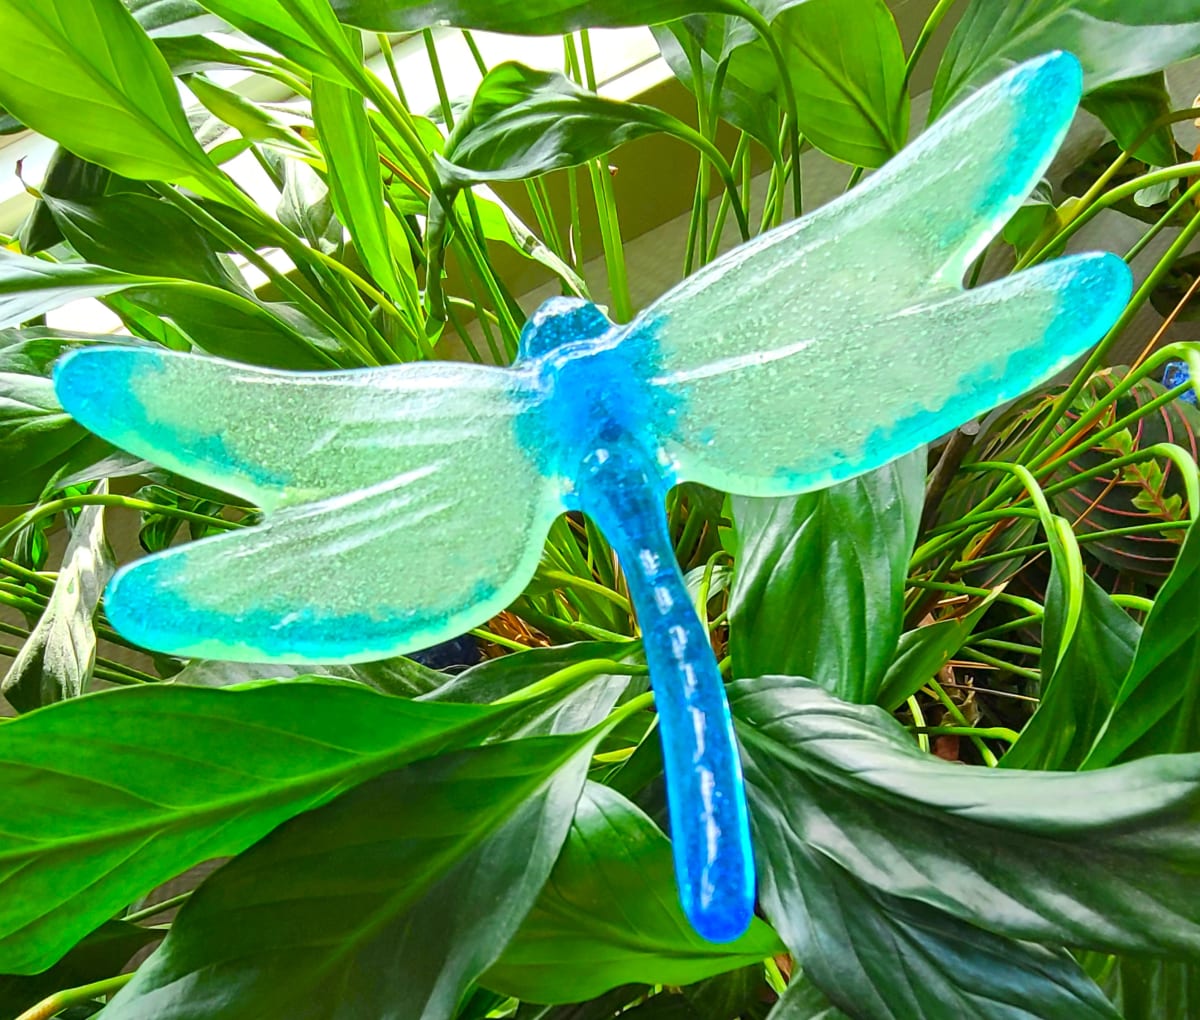 Plant Pick-Dragonfly, Turquoise/Green, Large by Kathy Kollenburn 